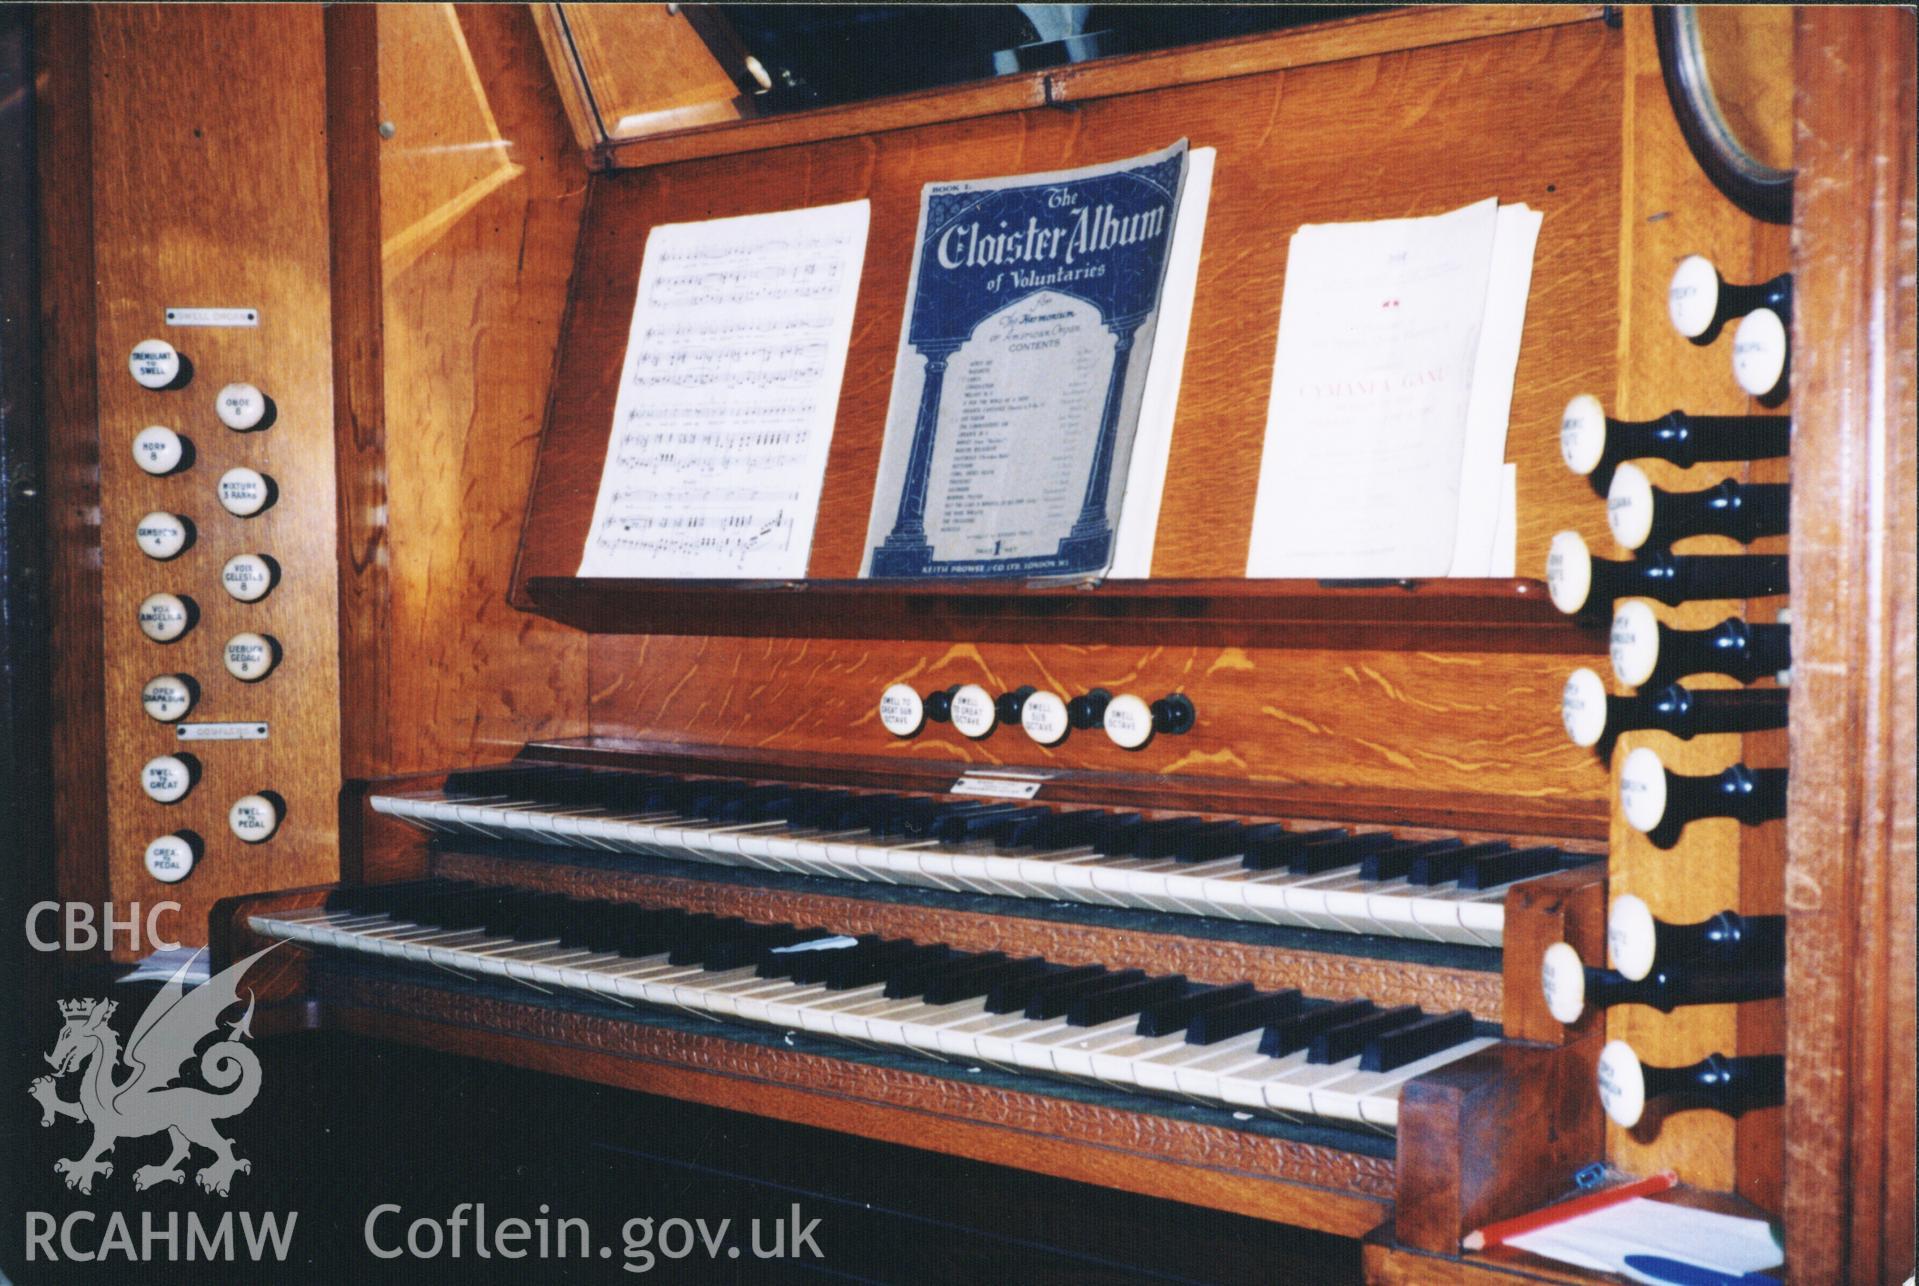 Colour photograph showing detail of organ at Bethania chapel, Maesteg, 2003. Donated to the RCAHMW by Cyril Philips as part of the Digital Dissent Project.